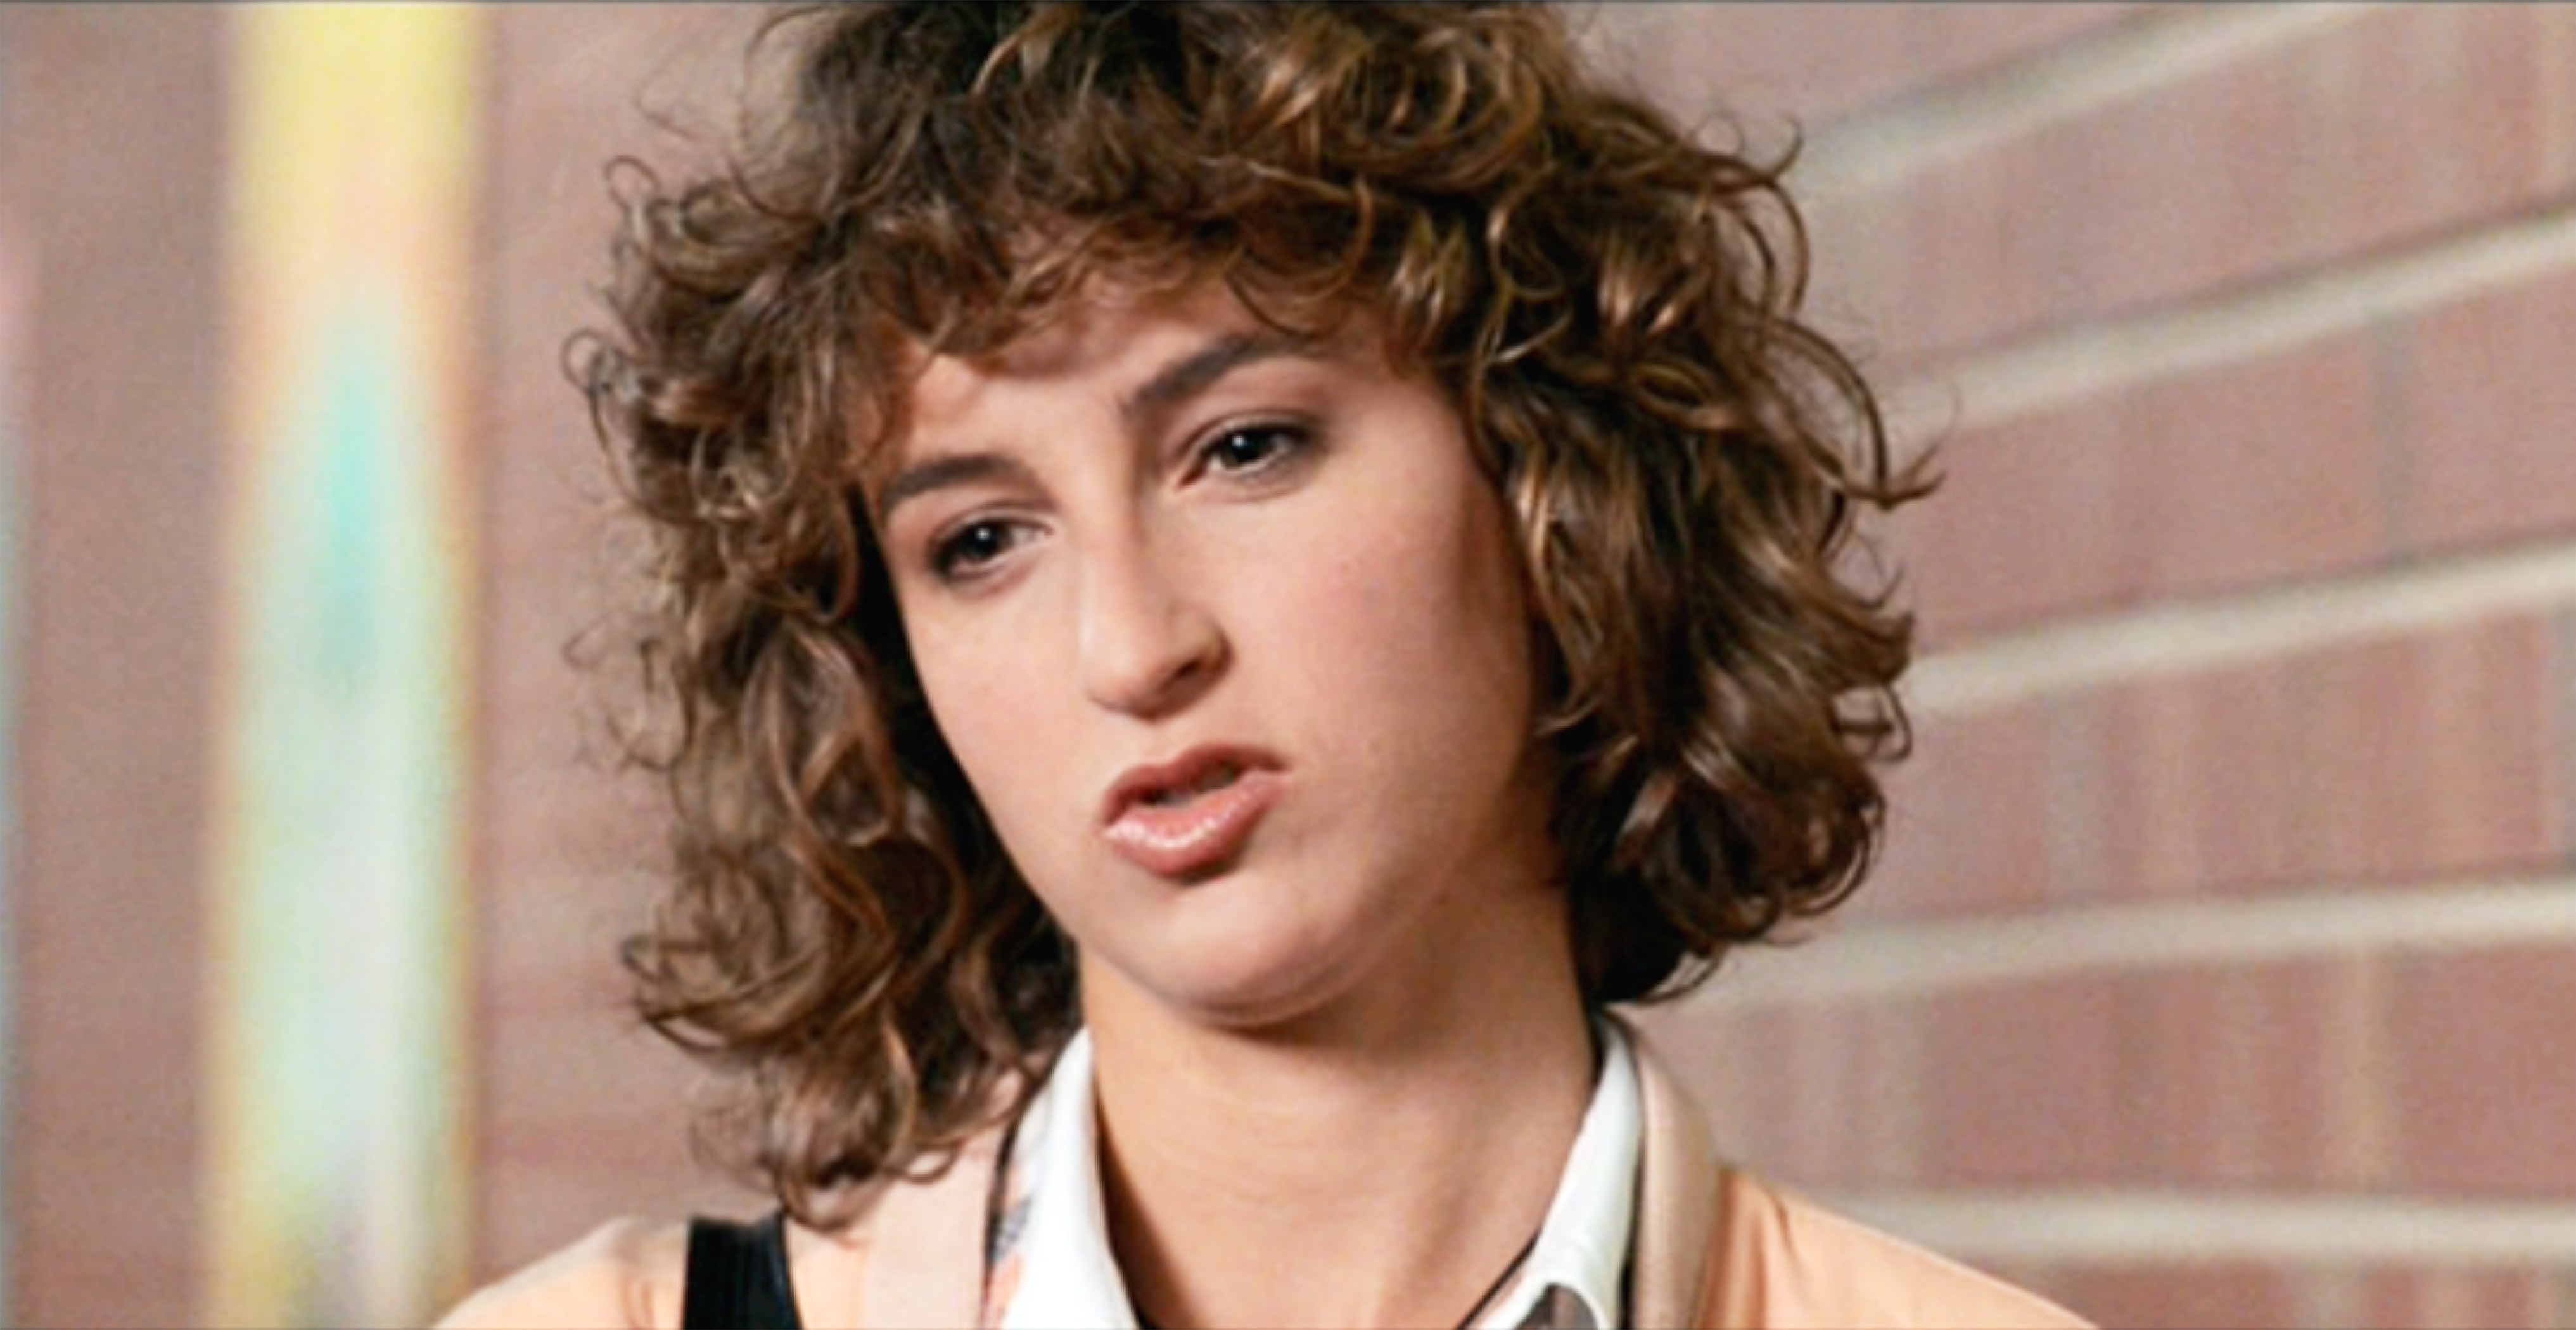 Jennifer Grey as Jeanie Bueller in the 1986 movie "Ferris Bueller's Day Off" | Source: Getty Images